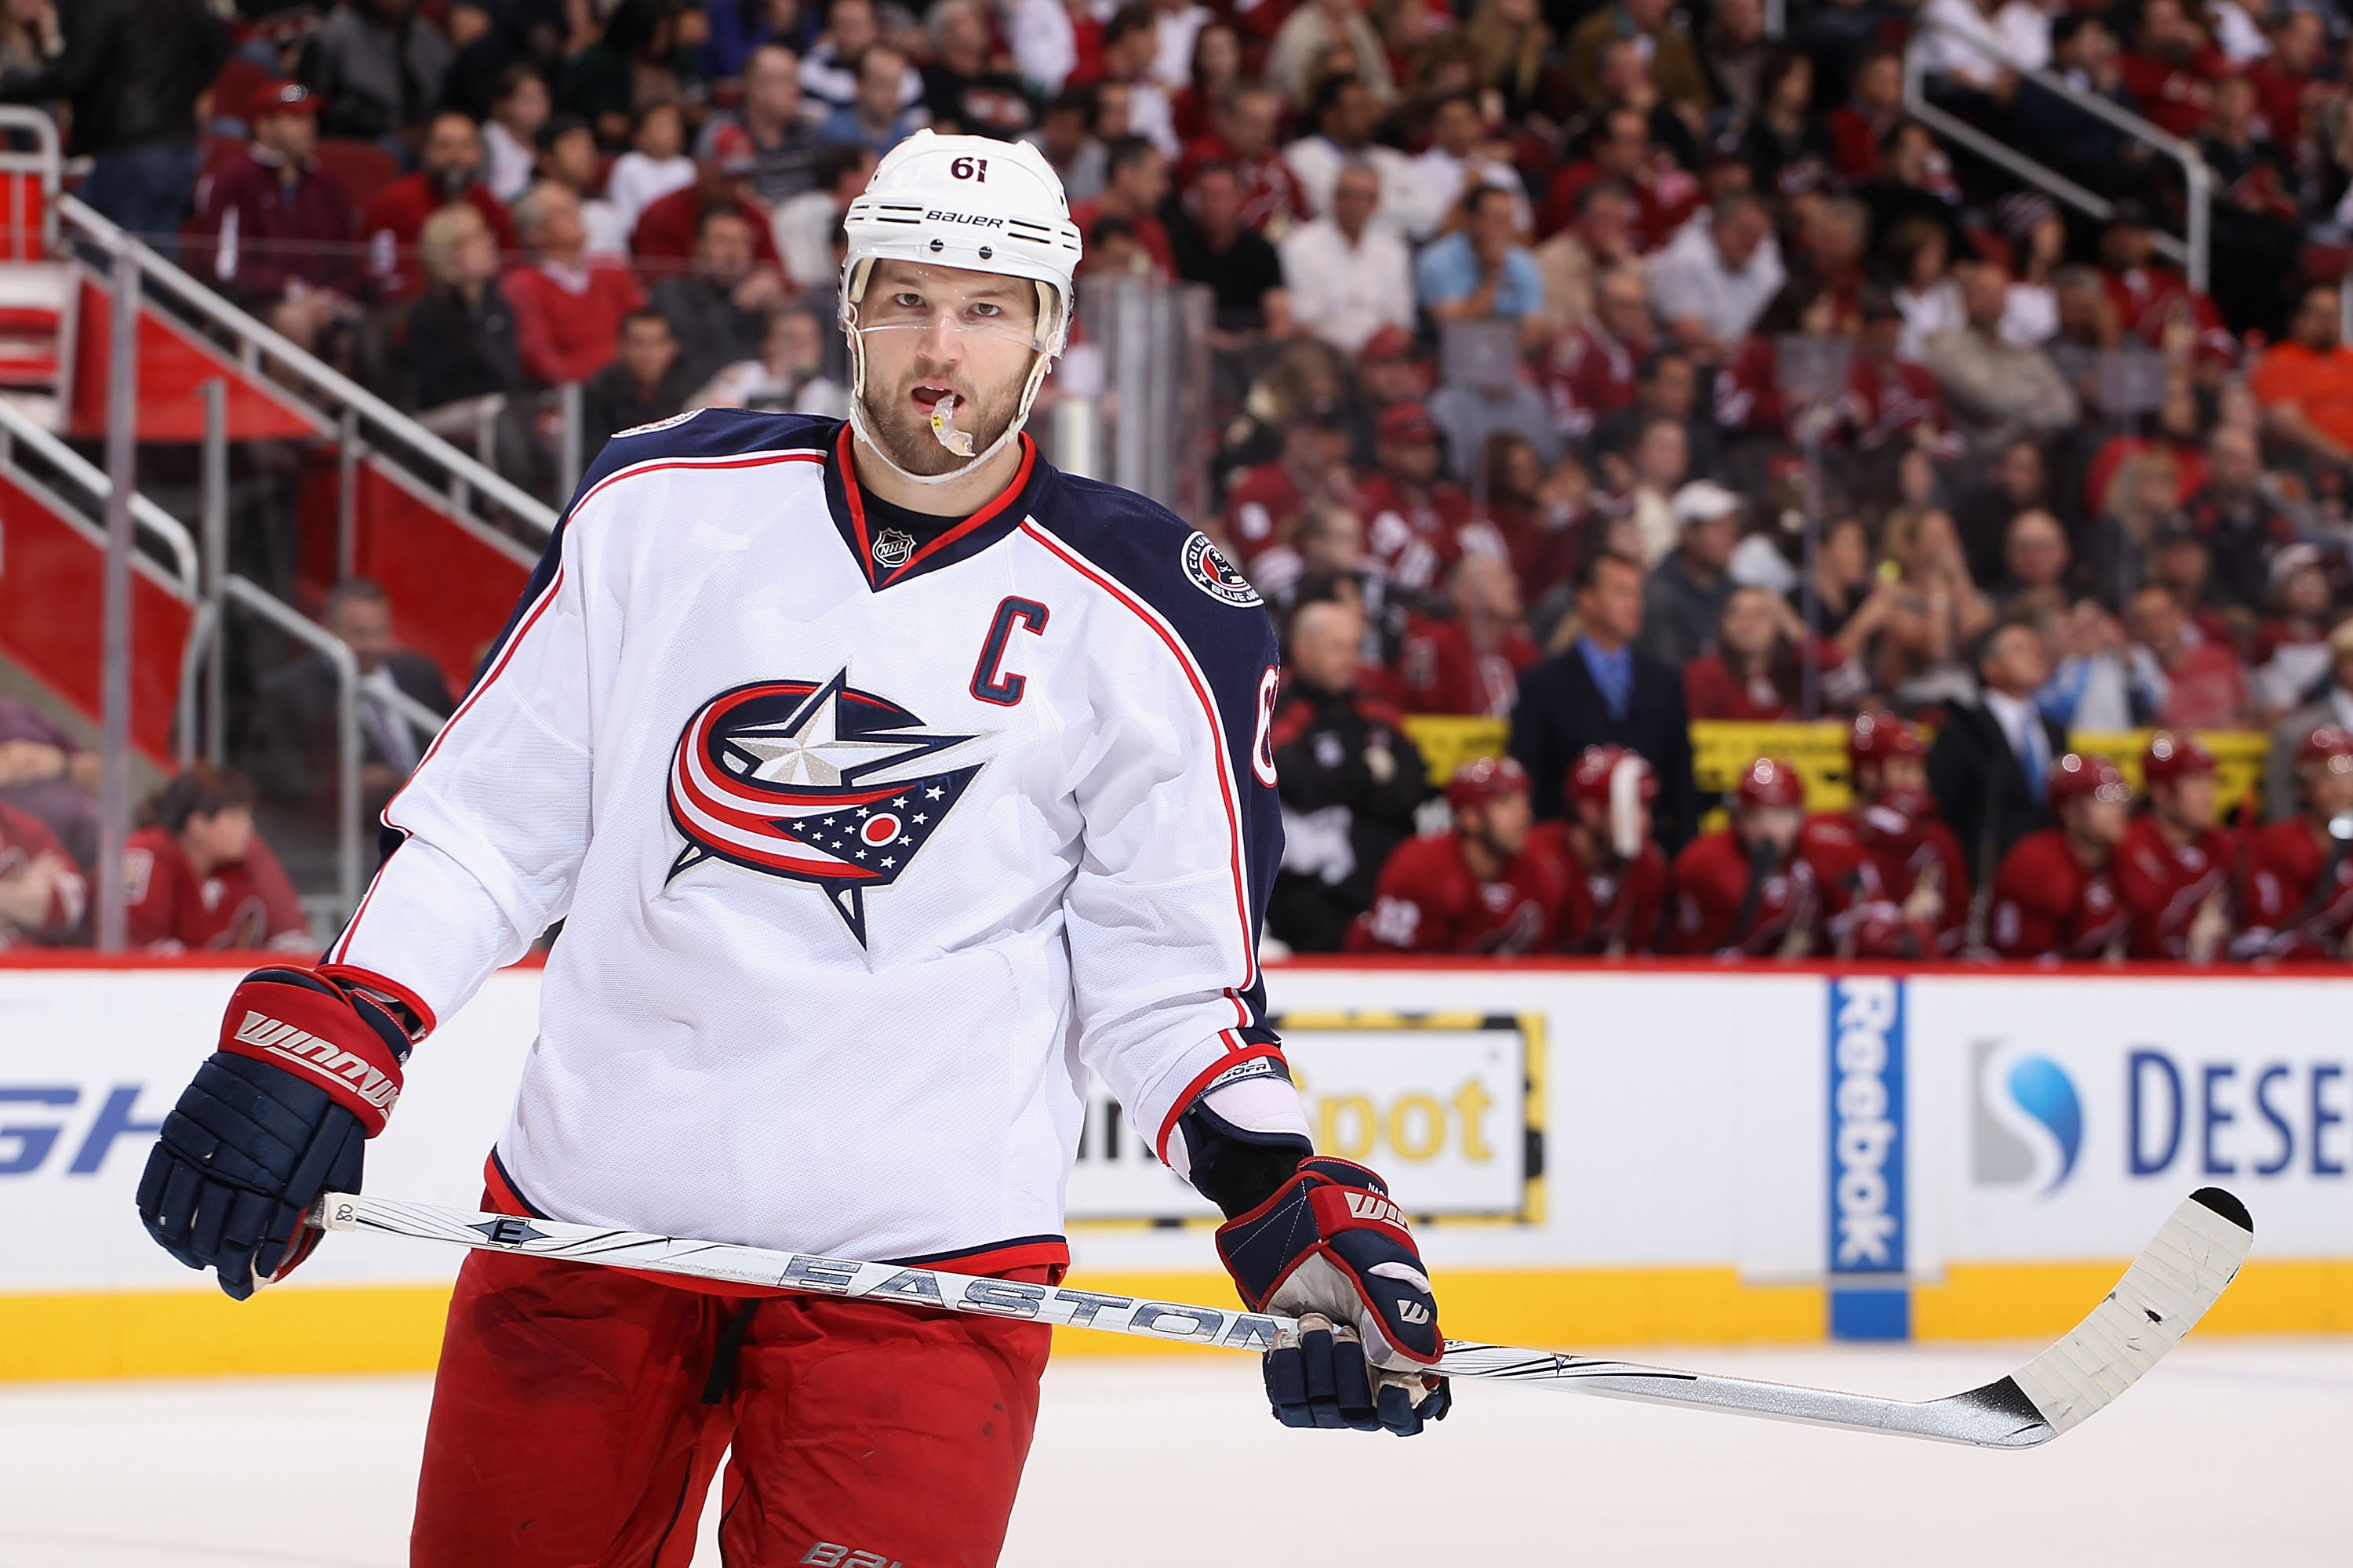 Rick Nash best served by move out of Columbus - The Hockey News